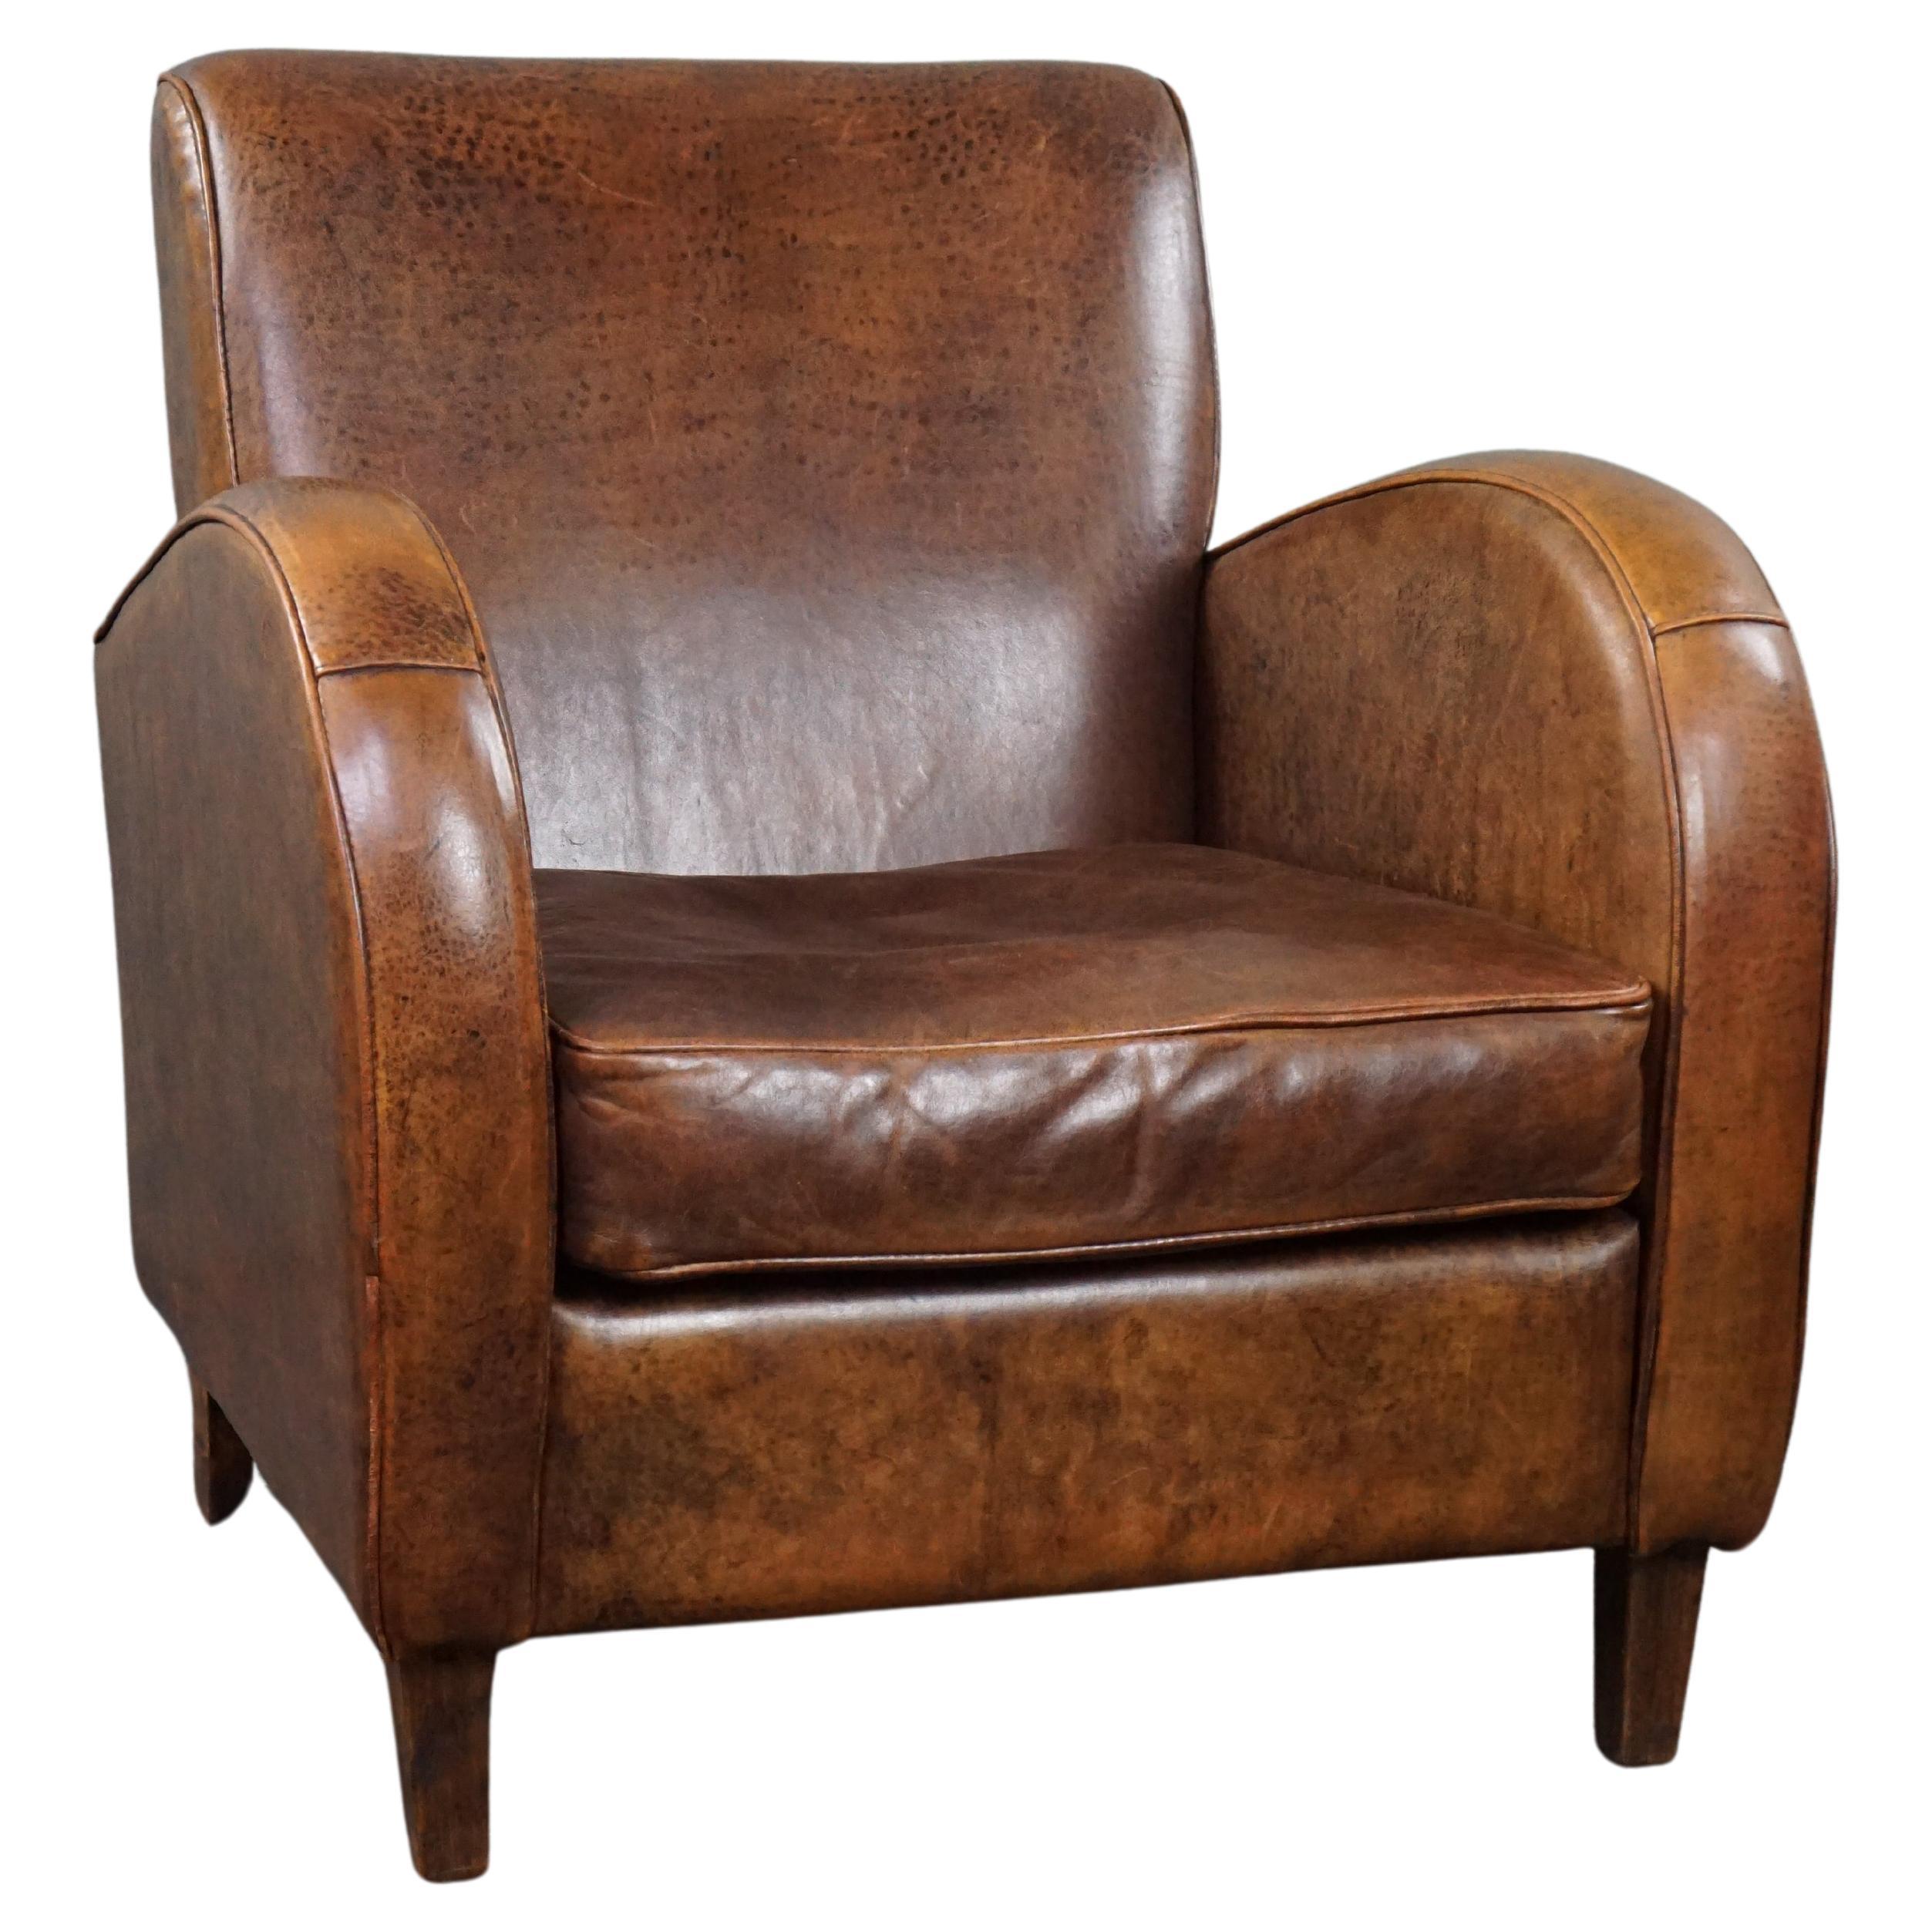 Sleekly designed comfortable sheep leather design armchair For Sale